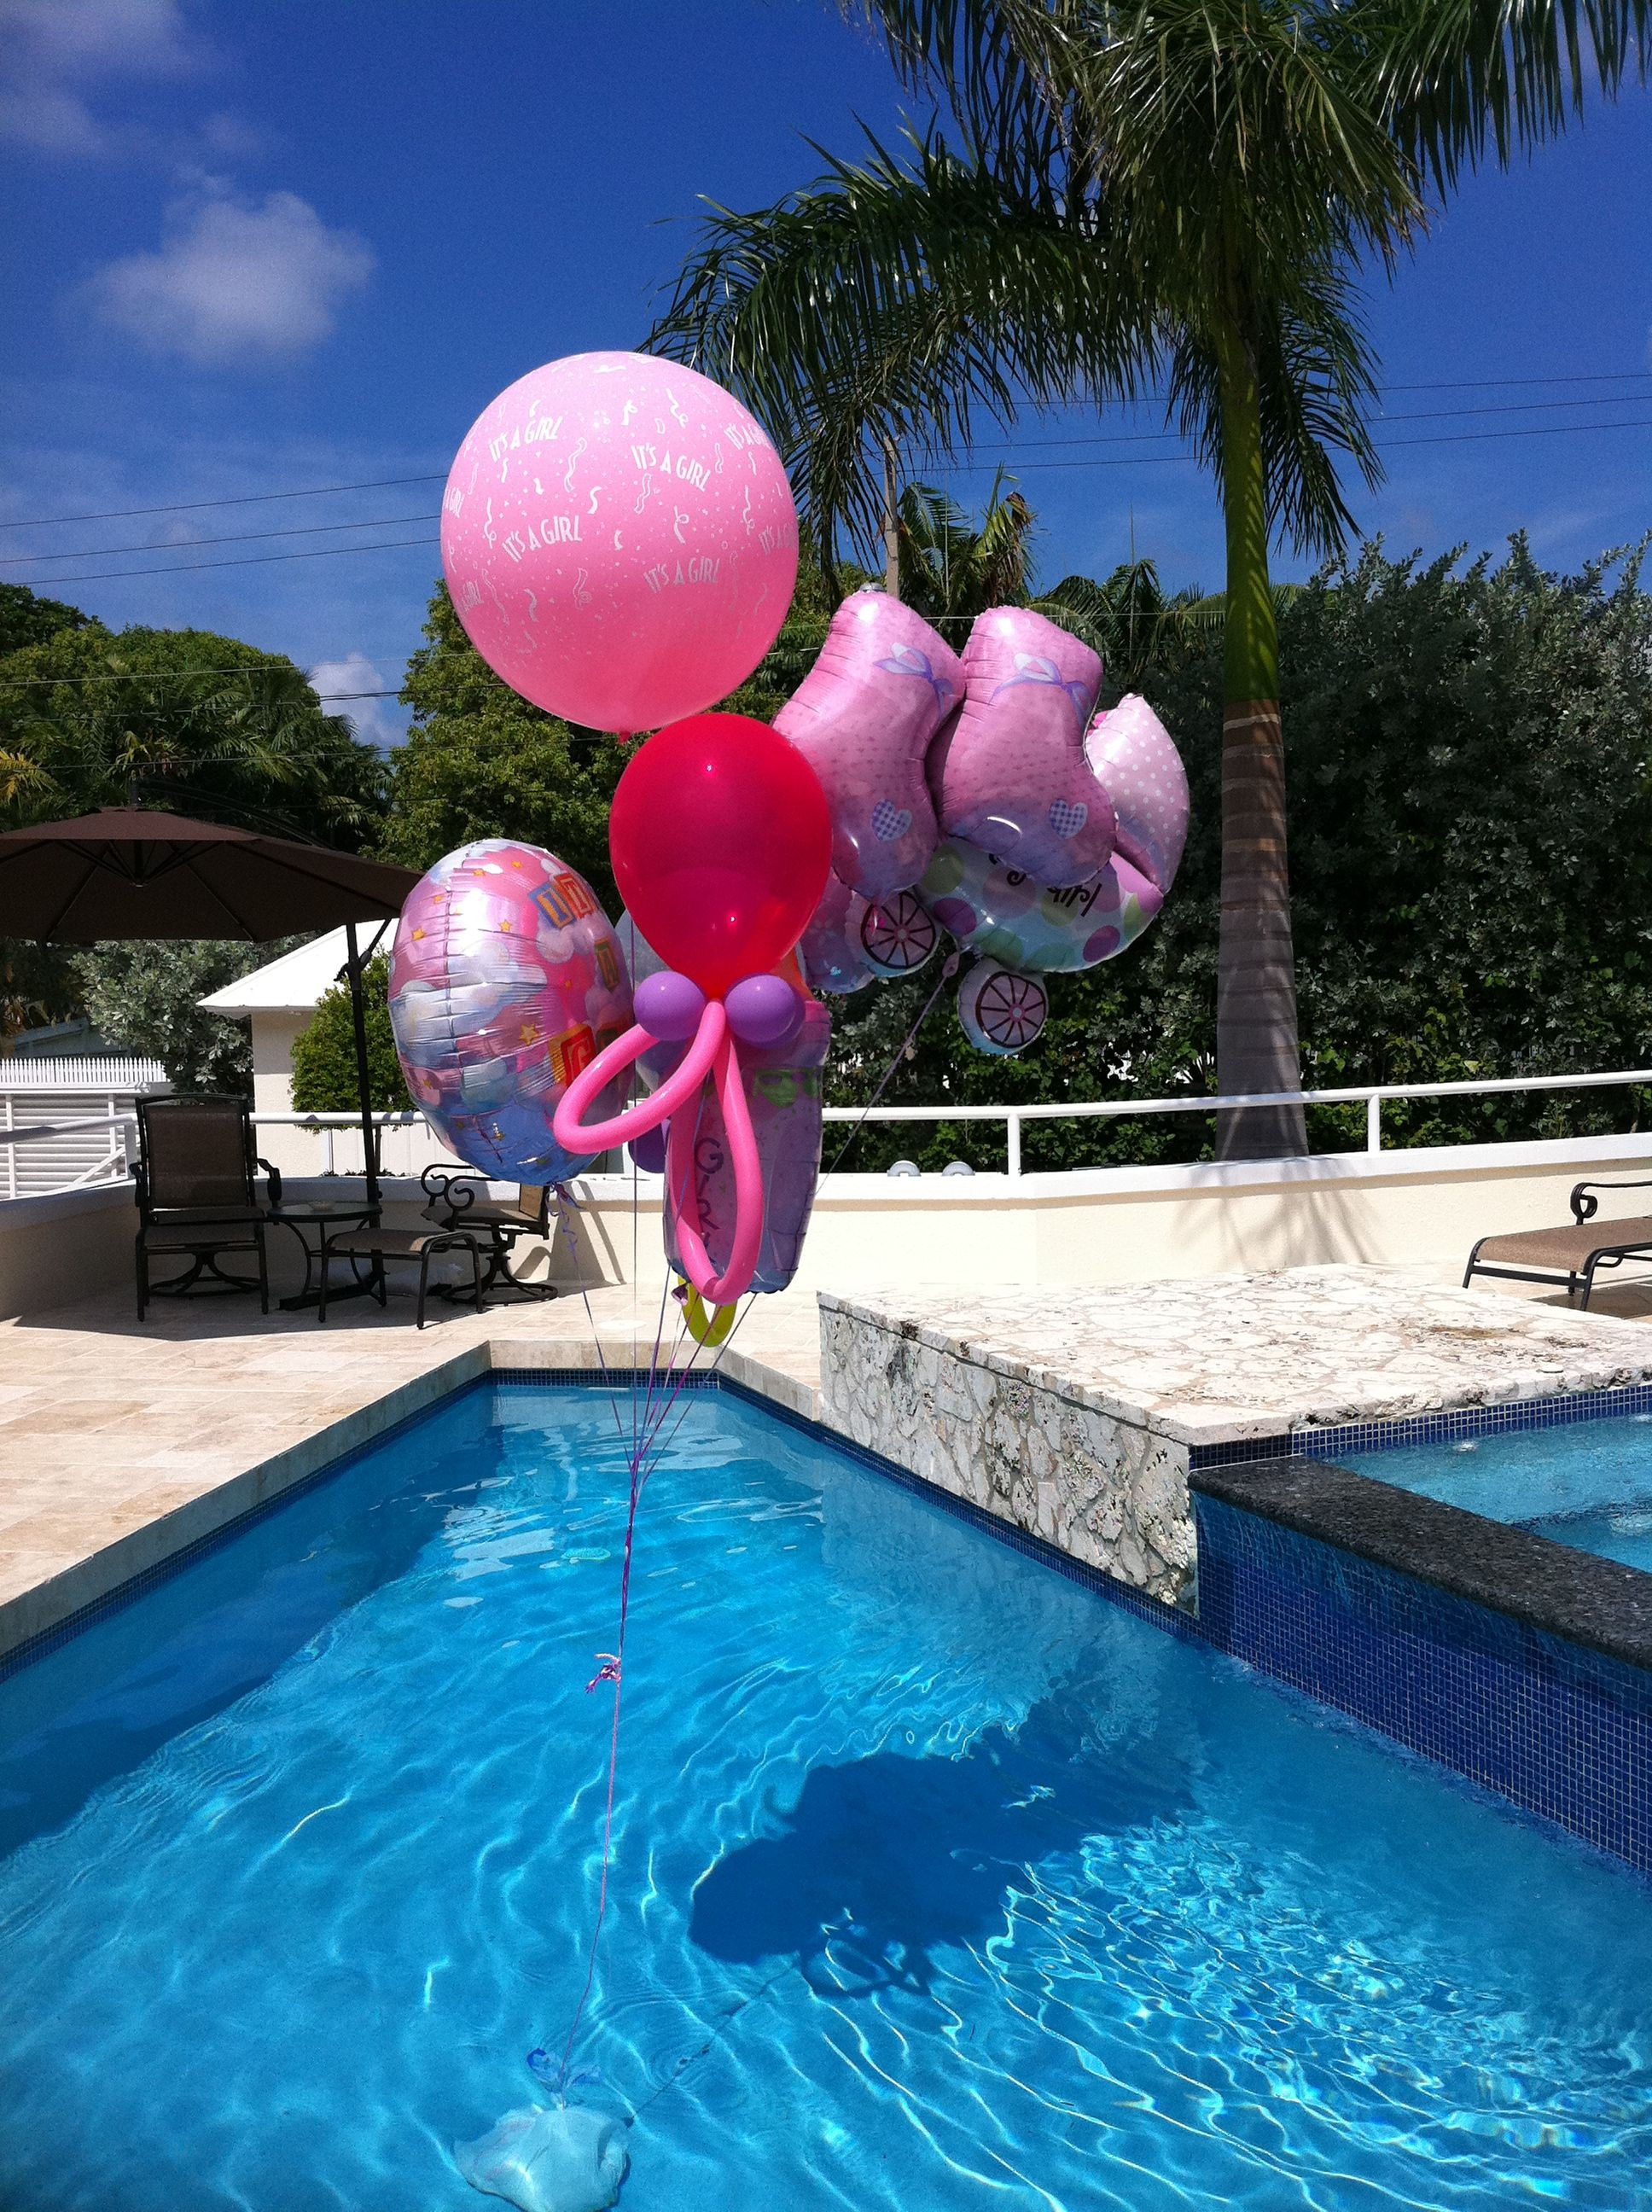 Baby Pool Party Ideas
 Baby shower balloon bouquet over a pool